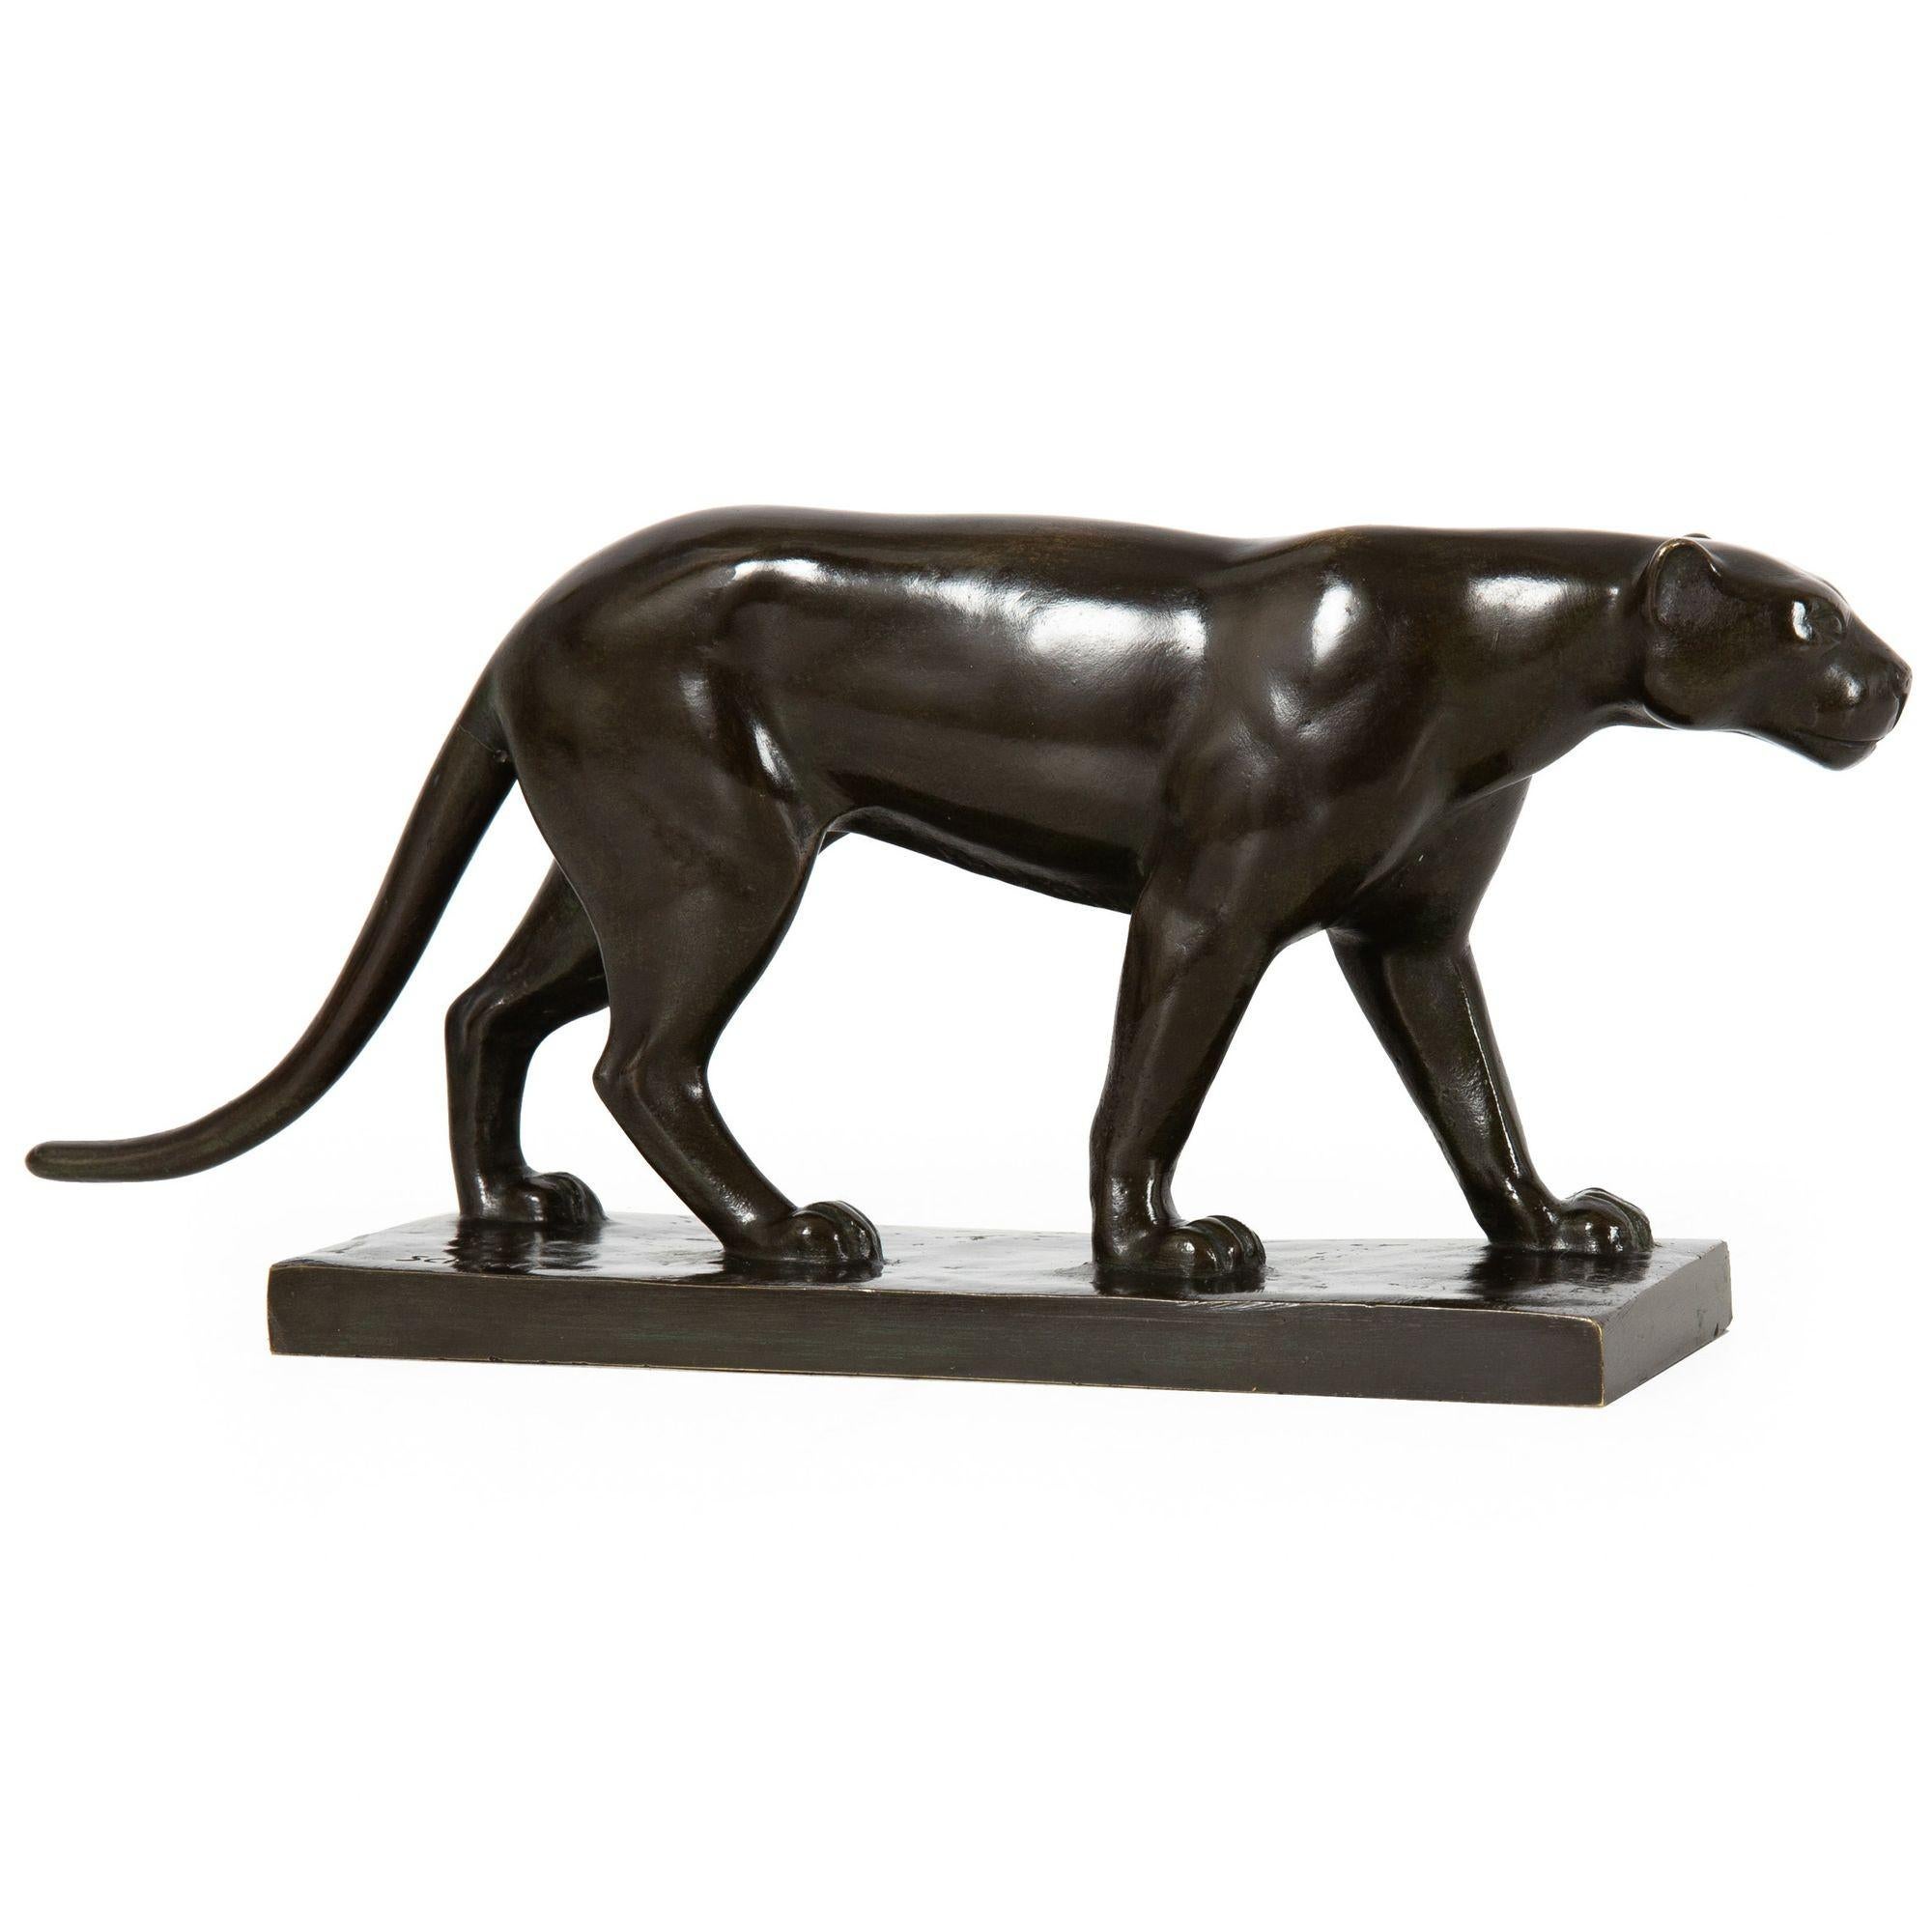 German Art Deco Antique Bronze Sculpture “Stalking Panther”, Wilhelm Schade In Good Condition For Sale In Shippensburg, PA